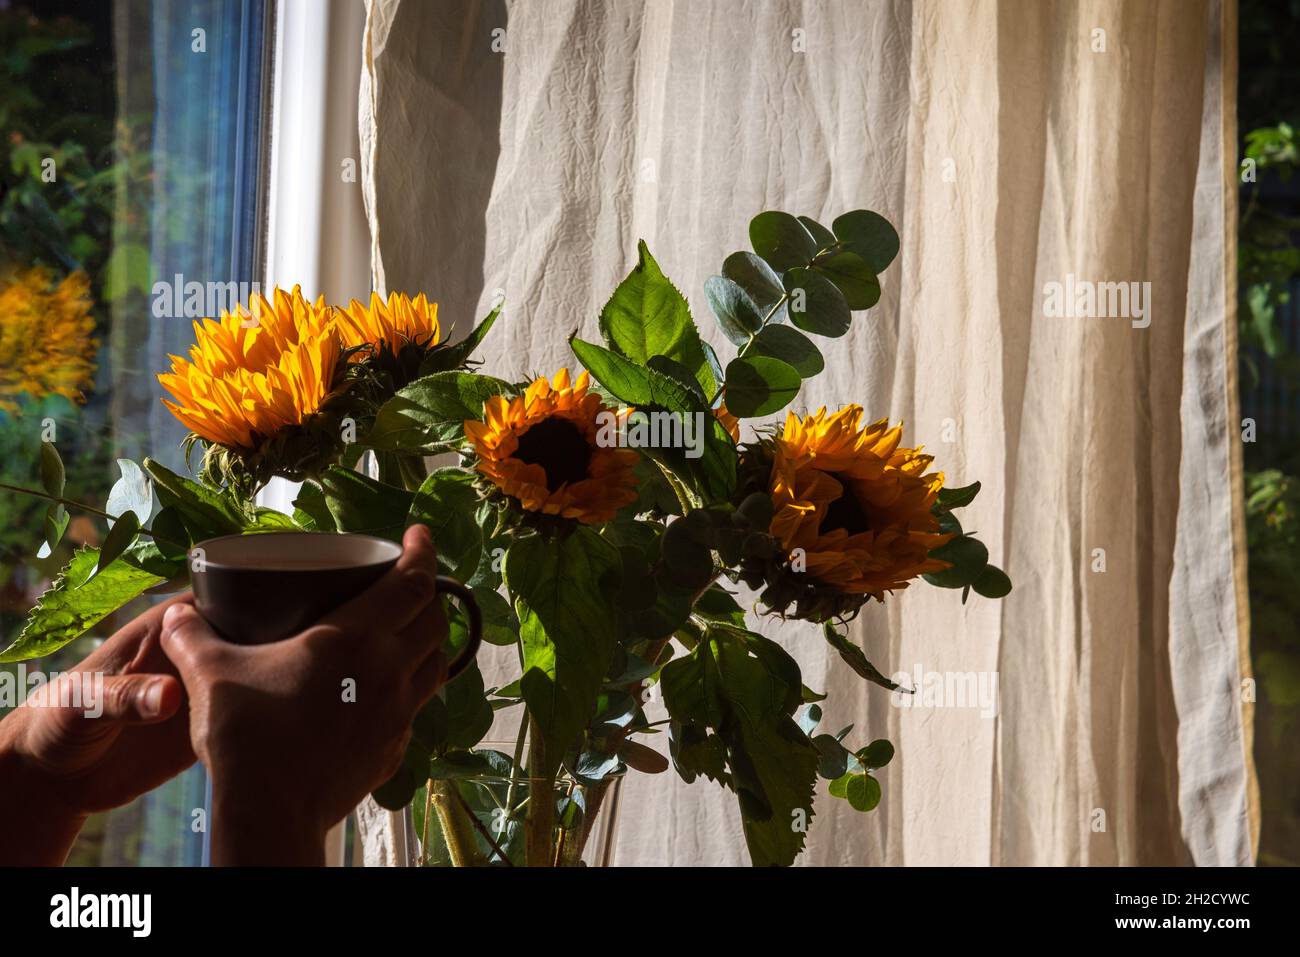 Mature man drinking hot drink from mug in cozy interior with beautiful sunflower flowers bouquet and garden view. Stock Photo